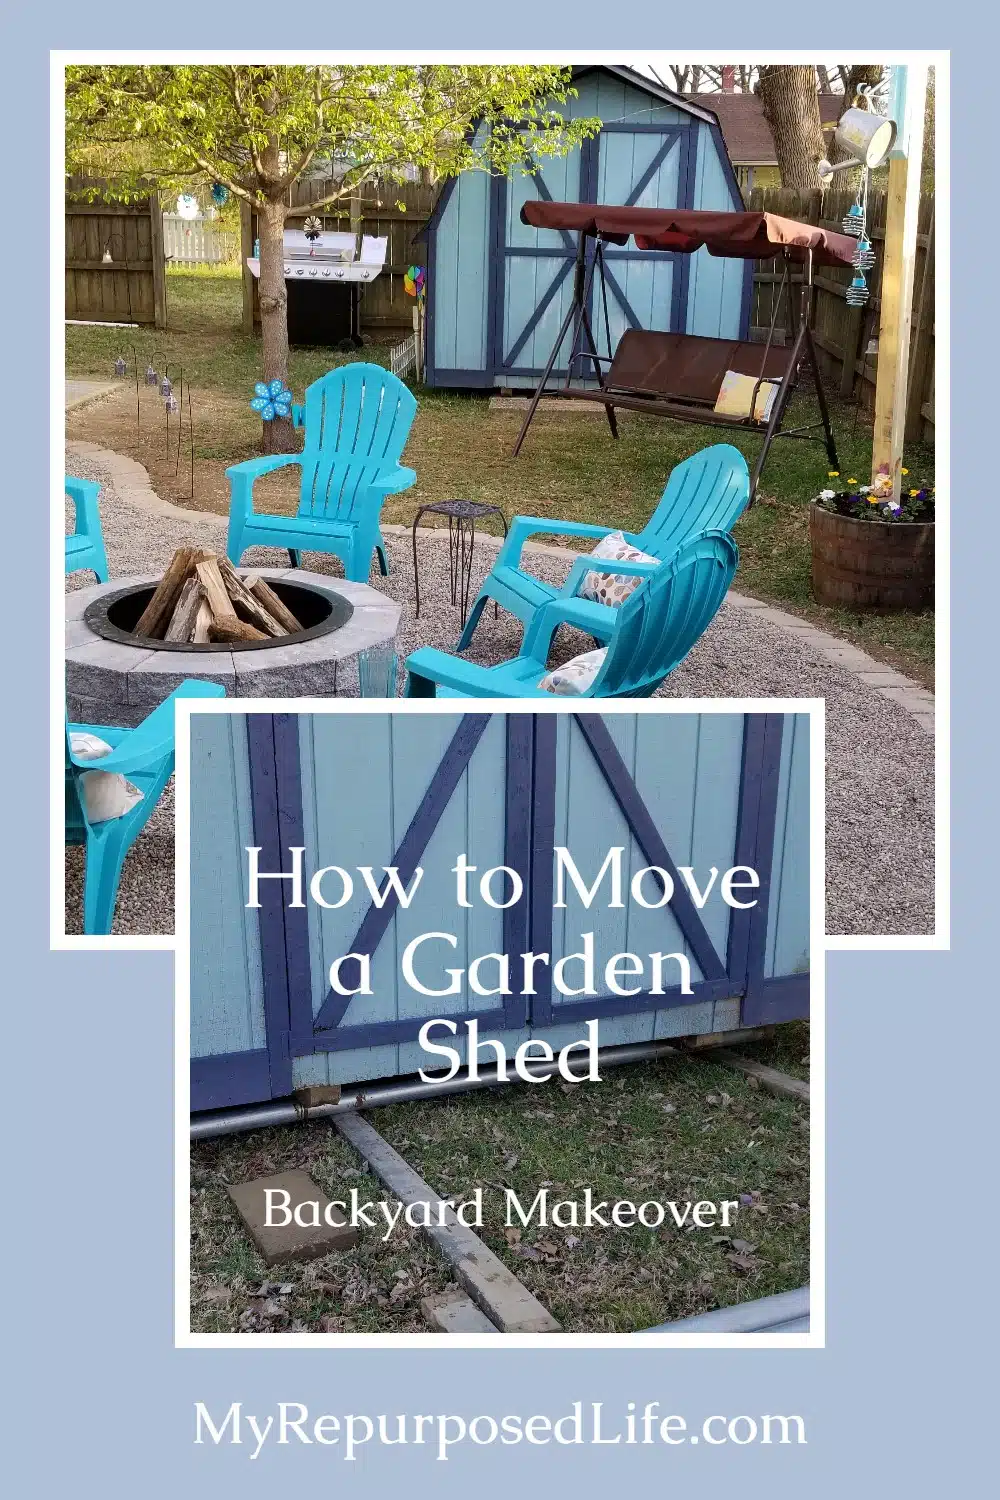 How to move a garden shed like a pro! With these tips and a video, you'll know just what to do when it's time to move your garden shed. This is a DIY, no need to hire the professionals for this job. #MyRepurposedLife via @repurposedlife